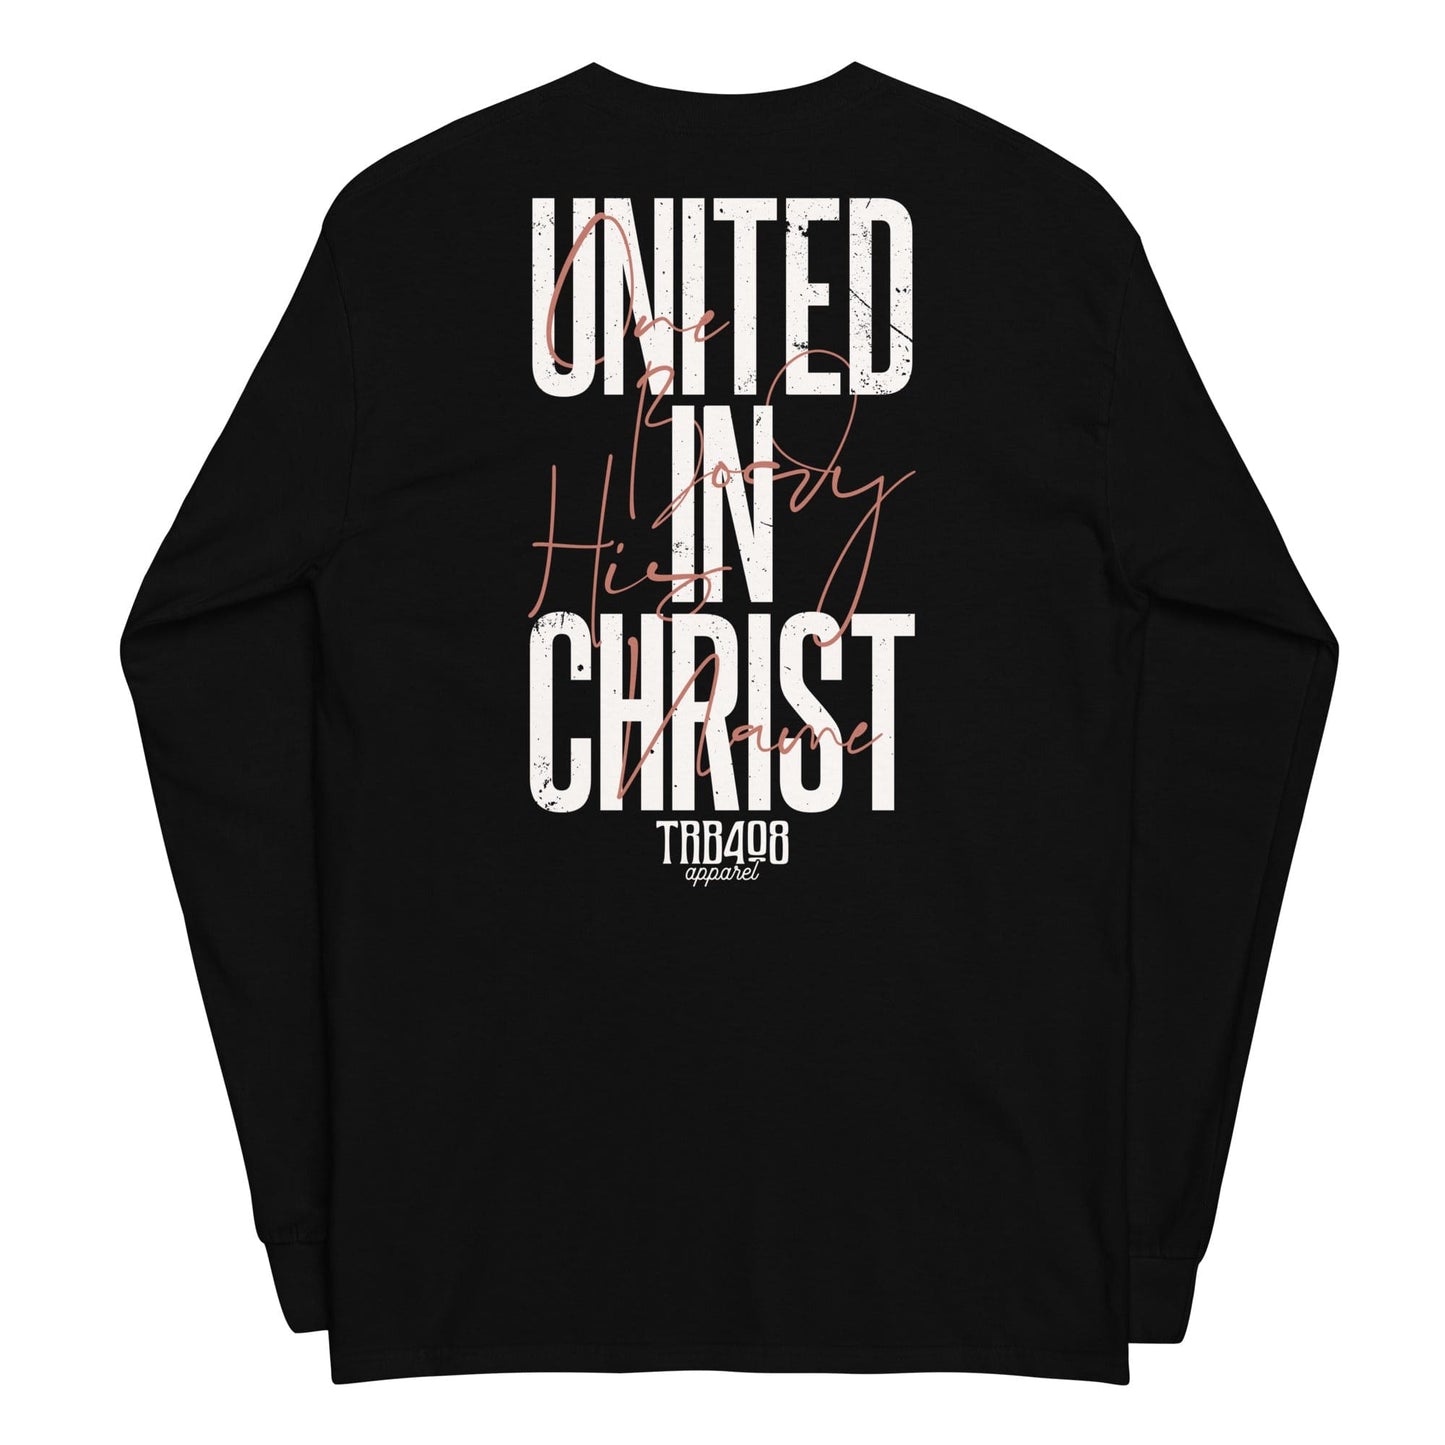 The UNITED IN CHRIST Tee